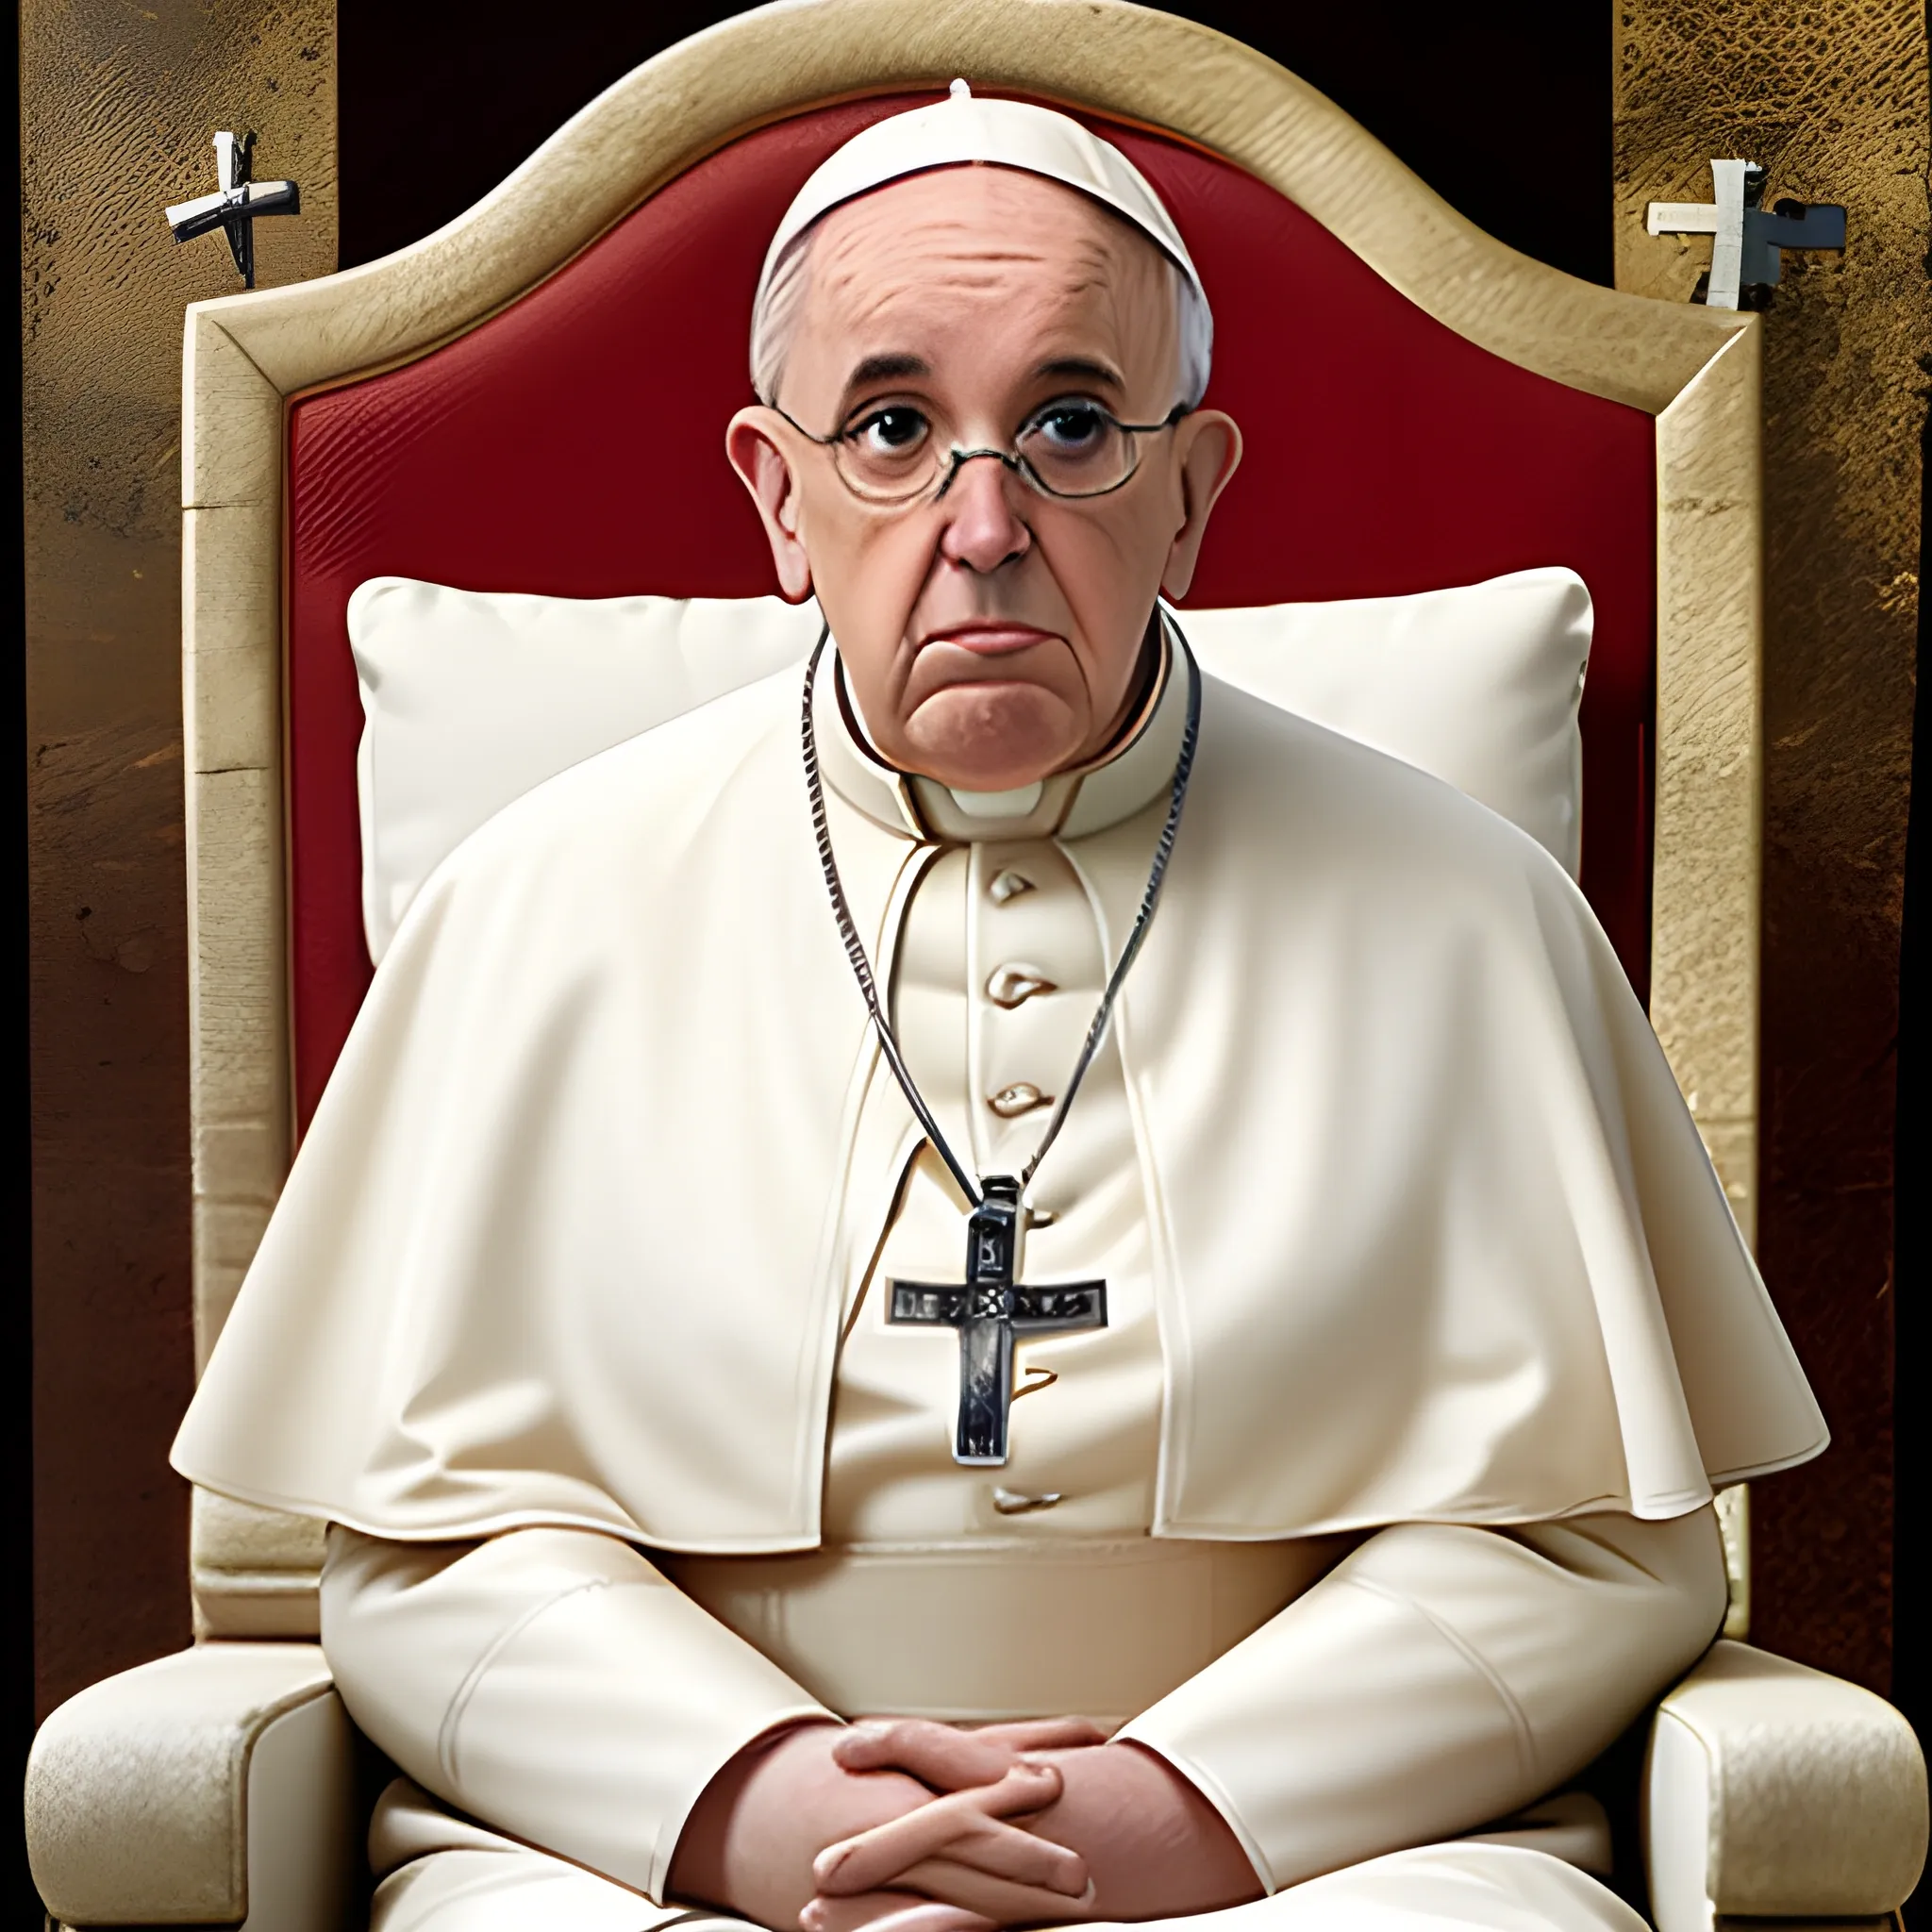 image of a pope